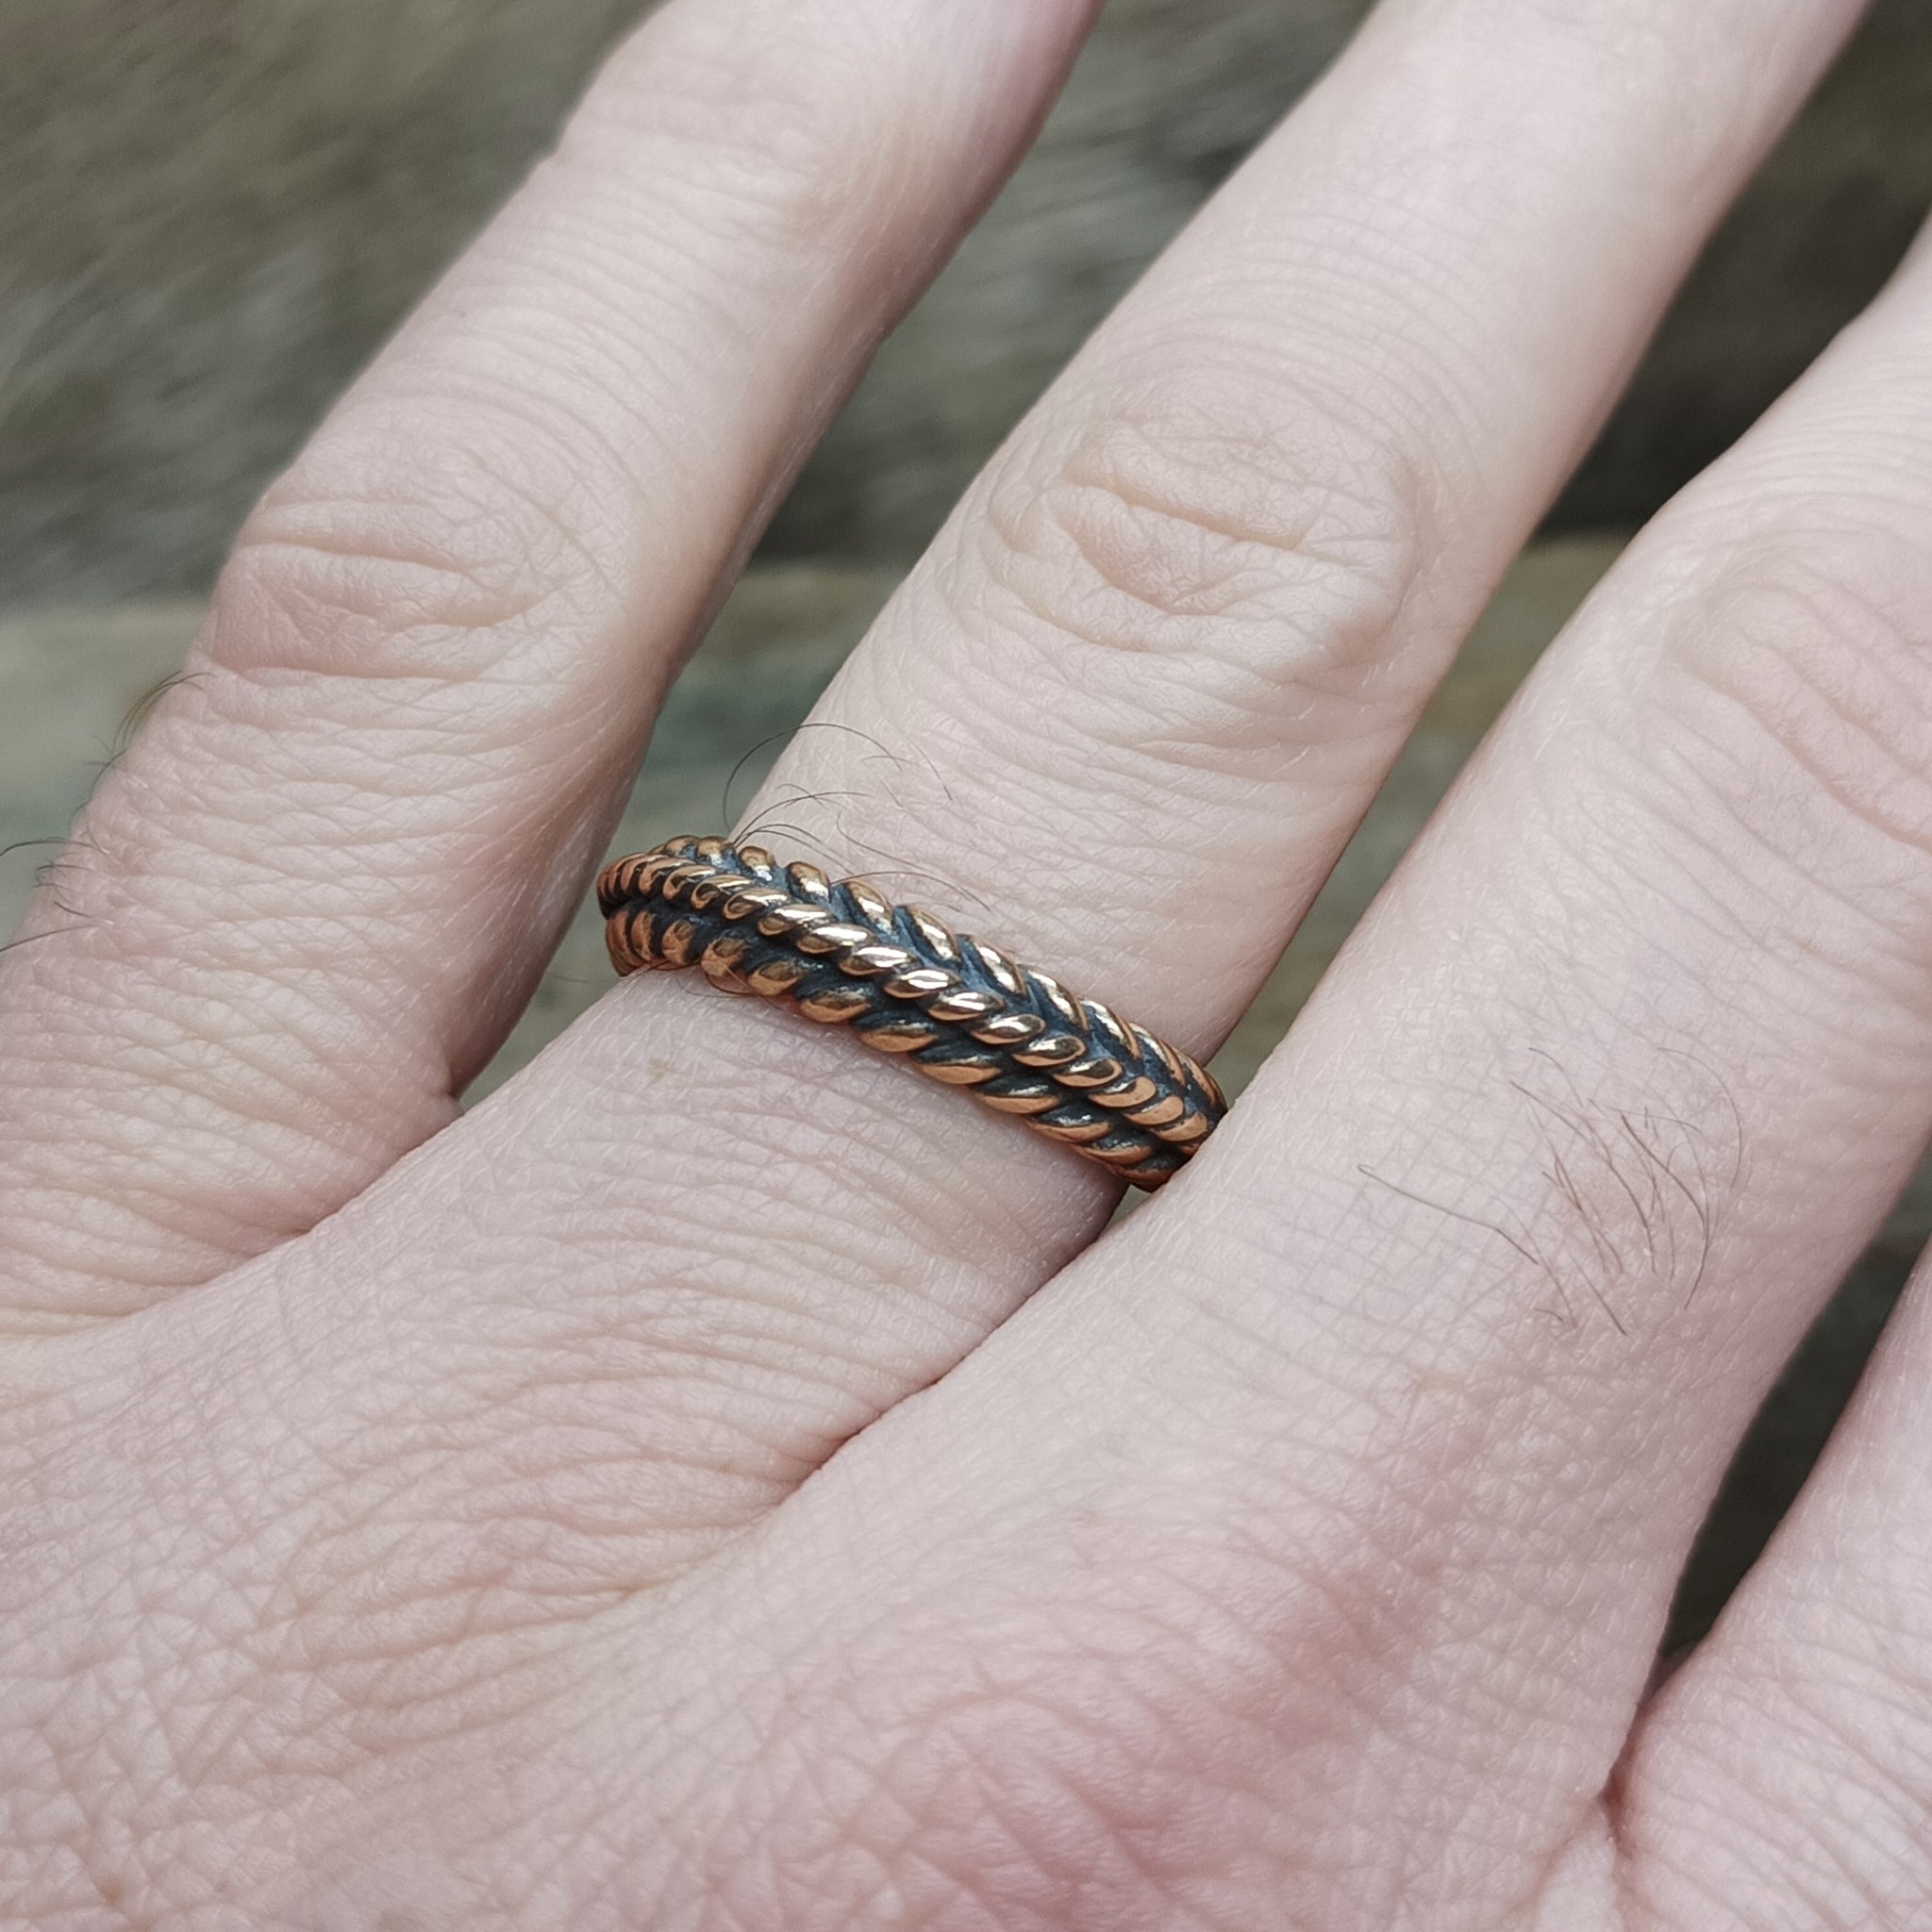 Bronze Braided Viking Ring on Finger - Front View